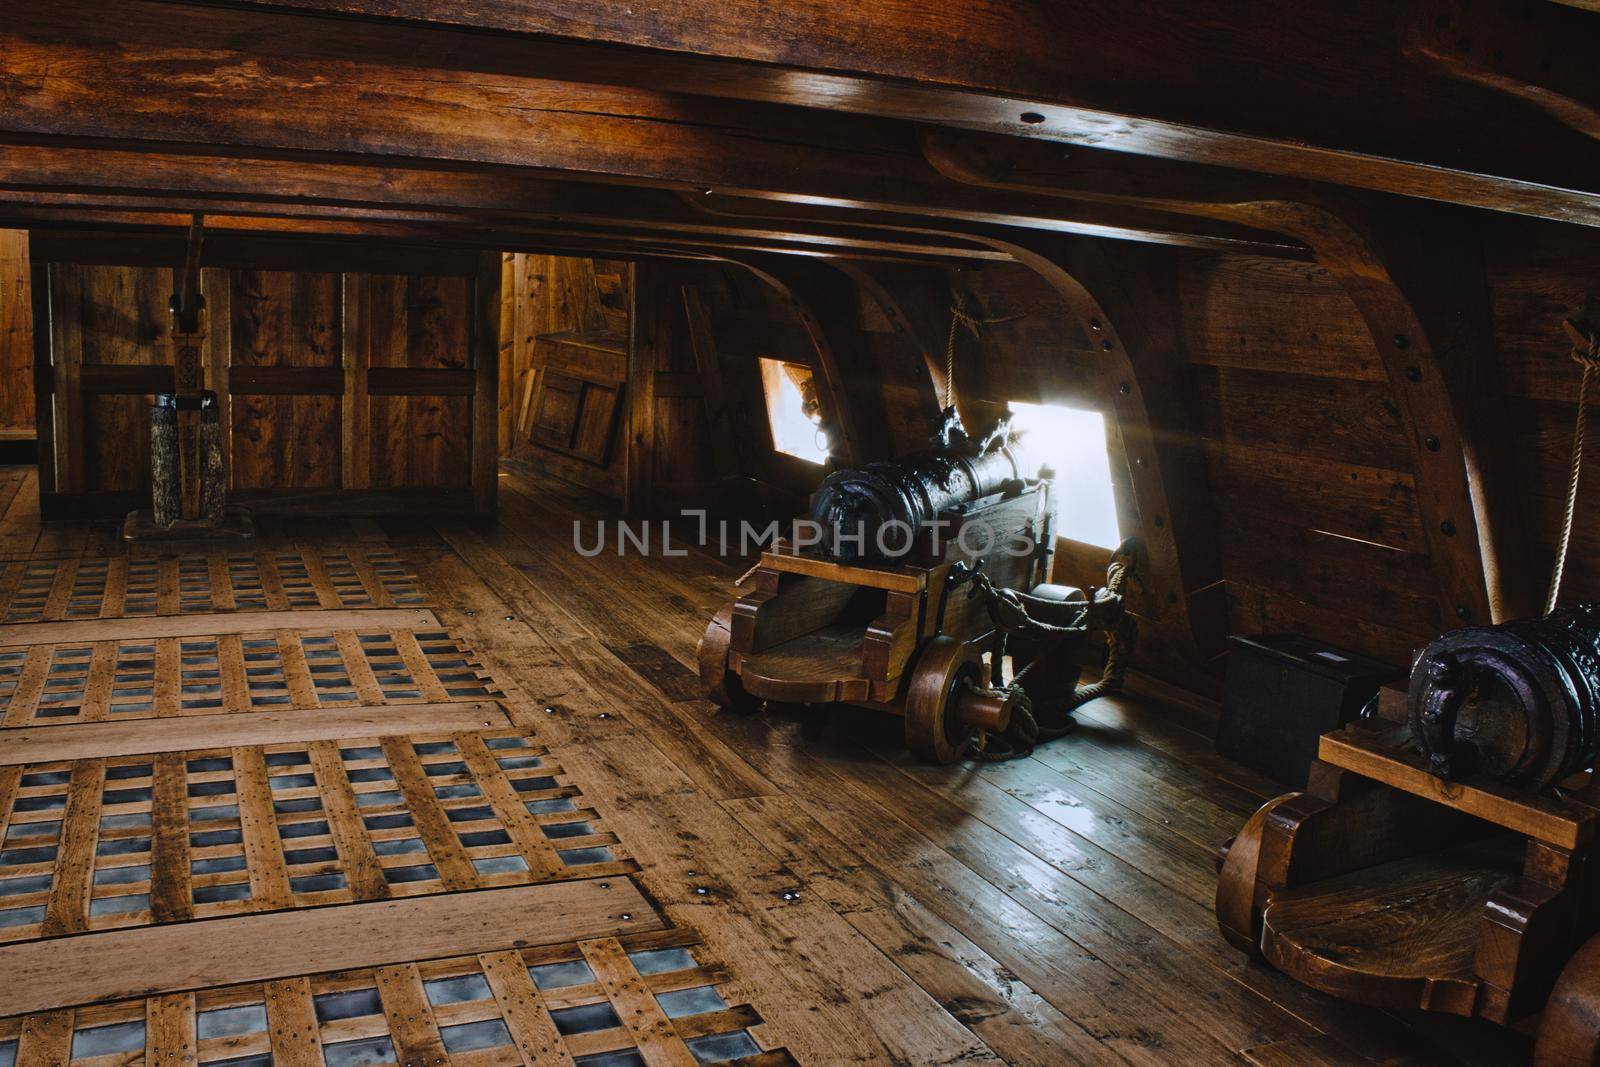 Stockholm, Sweden - 02/22/2019: Vasa museum, Stockholm - Interior of a gun deck on a recreation of the historic warship Vasa with cannons